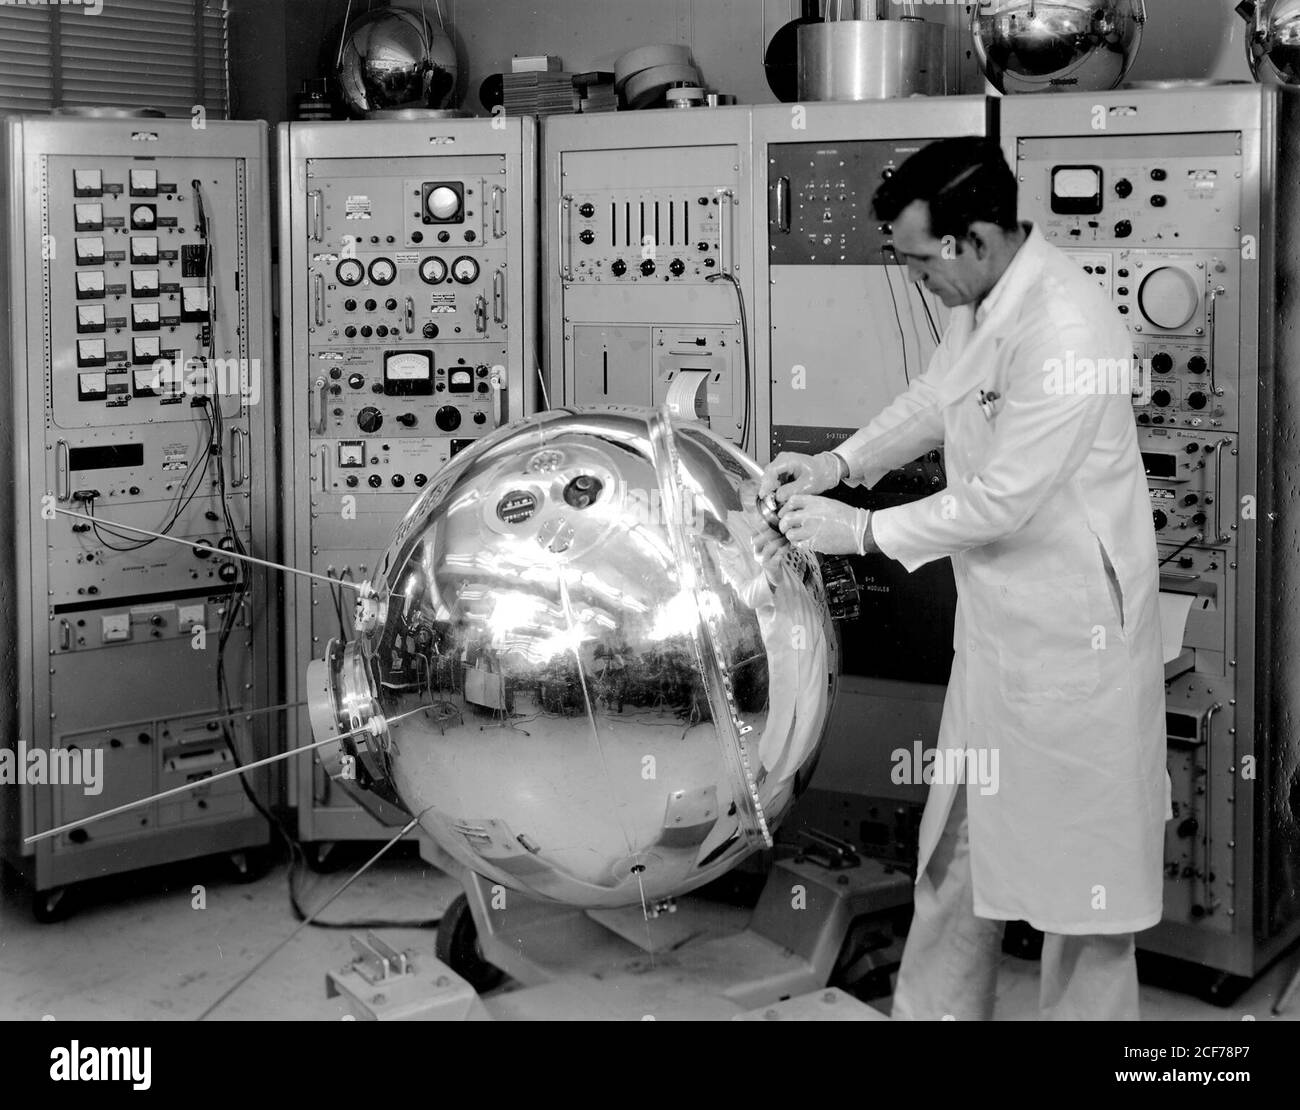 Weighing 405 lbs. (184 kg), this 35-inch (89-cm) pressurized stainless steel sphere measured the density, composition, pressure and temperature of Earth's atmosphere after its launch from Cape Canaveral on April 3, 1963. The mission was one of three that Goddard Space Flight Center specifically conducted to learn more about the atmosphere's physical properties, knowledge that they ultimately used for scientific and meteorological purposes. Explorer XVII carried two spectrometers, four vacuum pressure gauges and two electrostatic probes. Before it reached its intended orbit that ranged from 158 Stock Photo